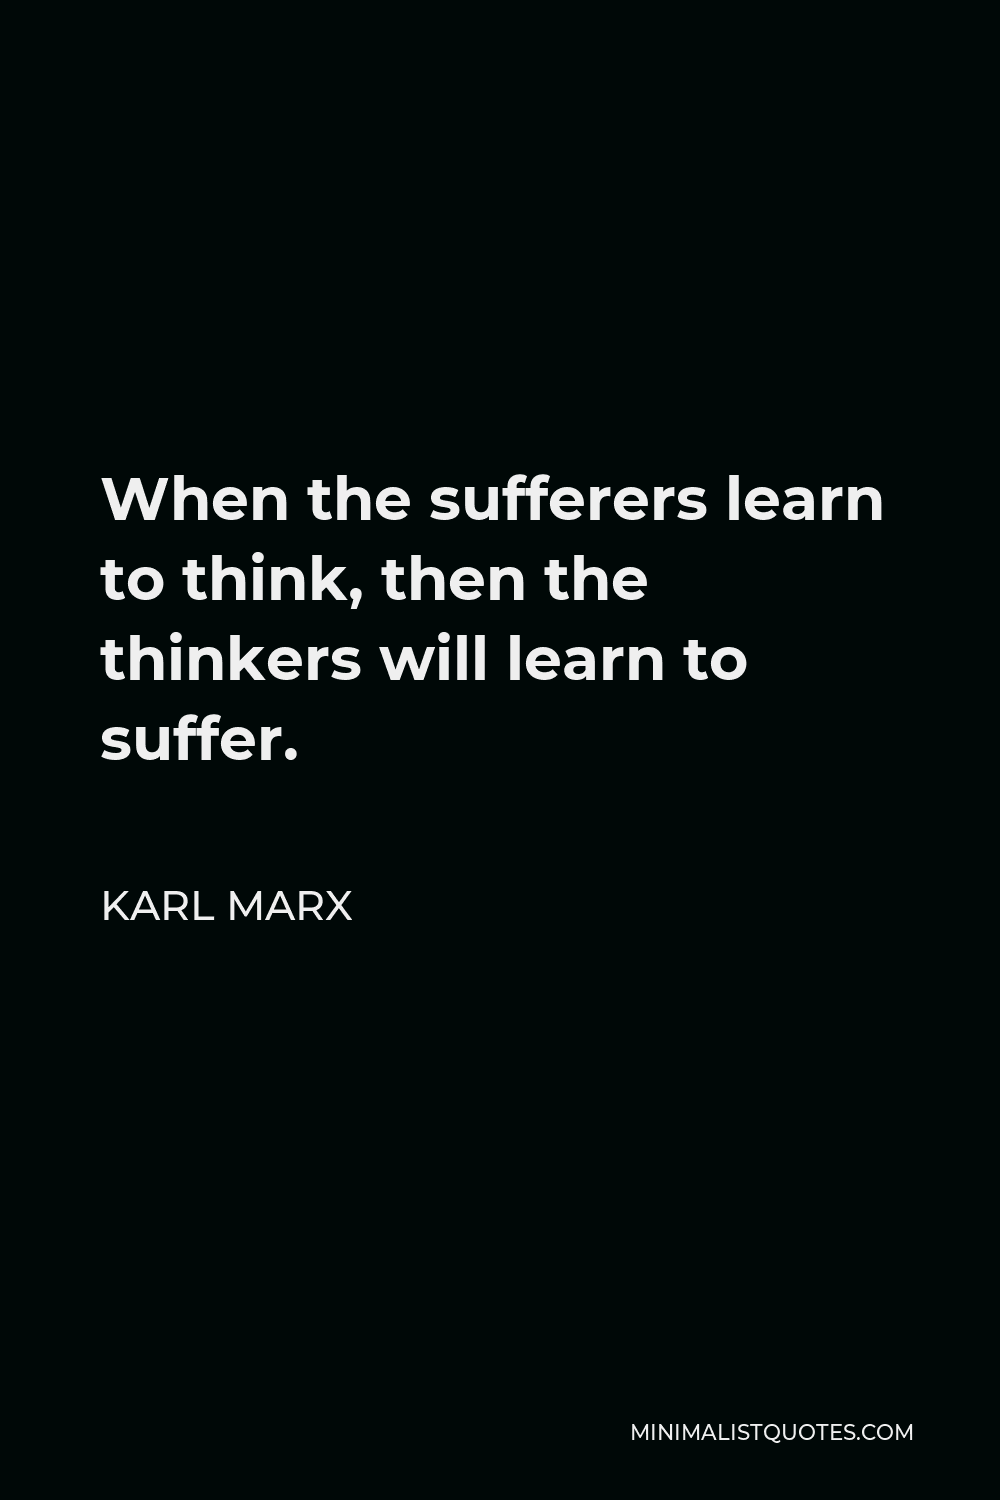 Karl Marx Quote - When the sufferers learn to think, then the thinkers will learn to suffer.